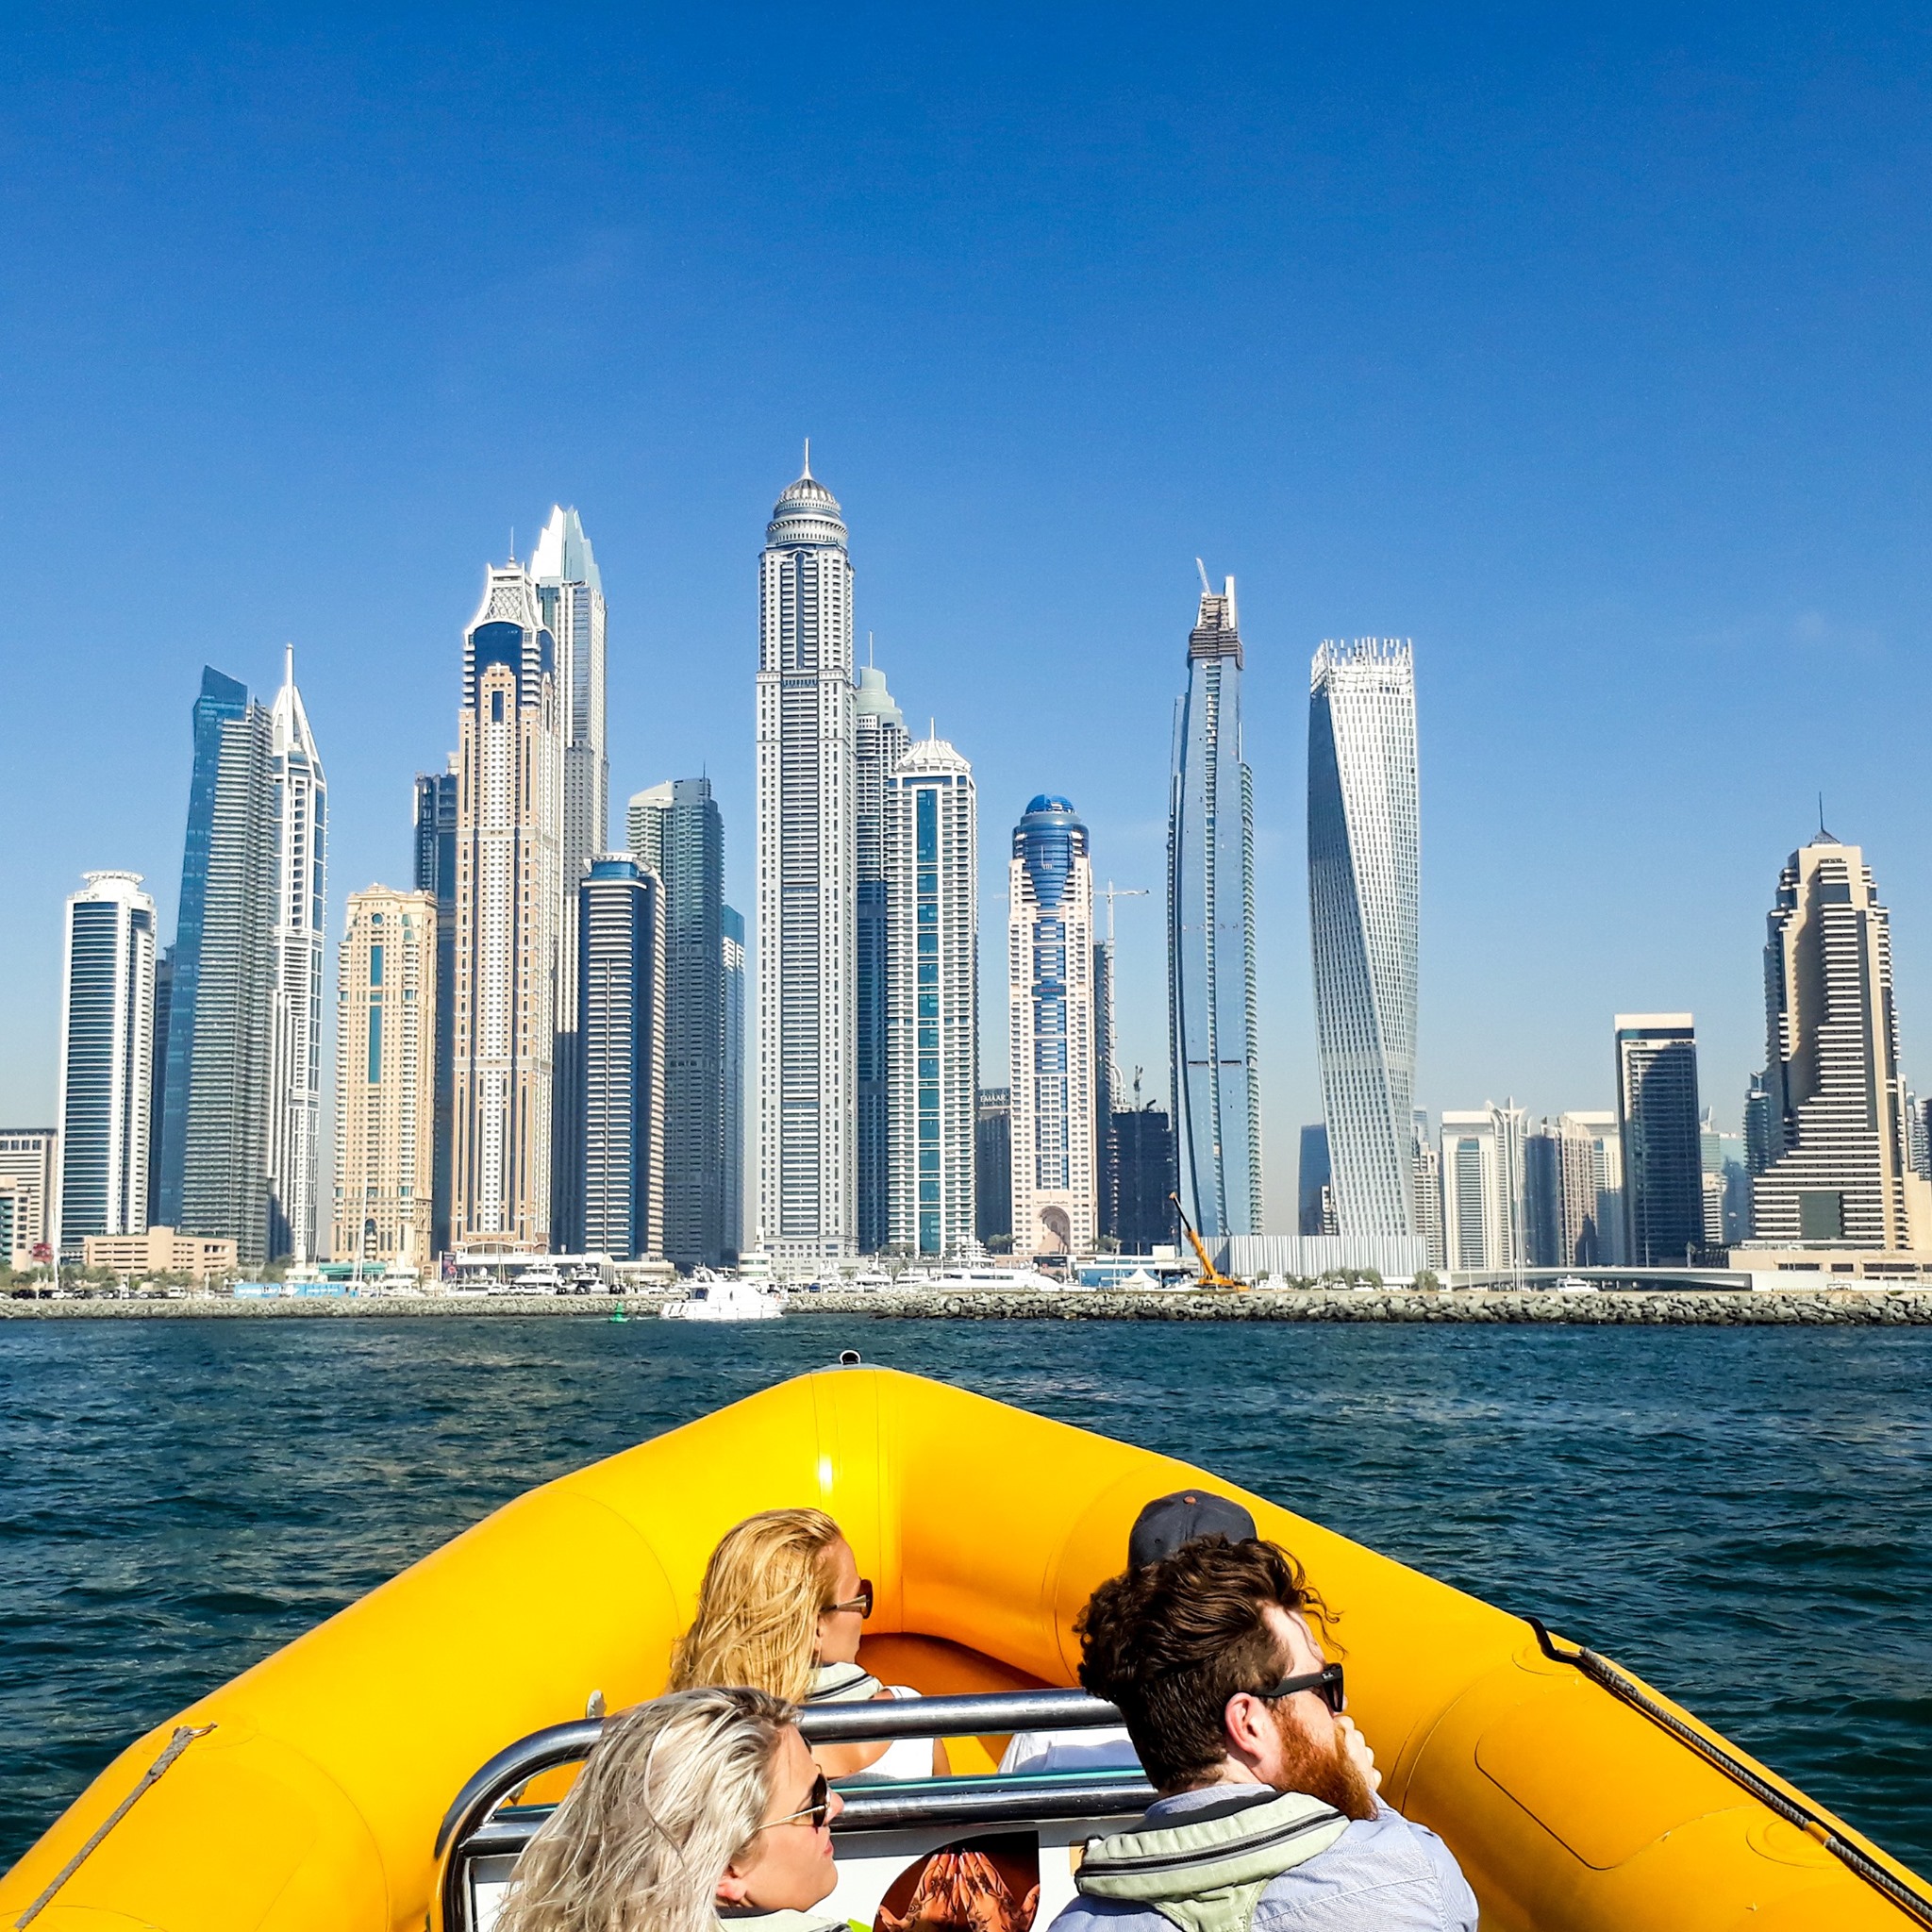 Enjoy the view on a boat in Dubai